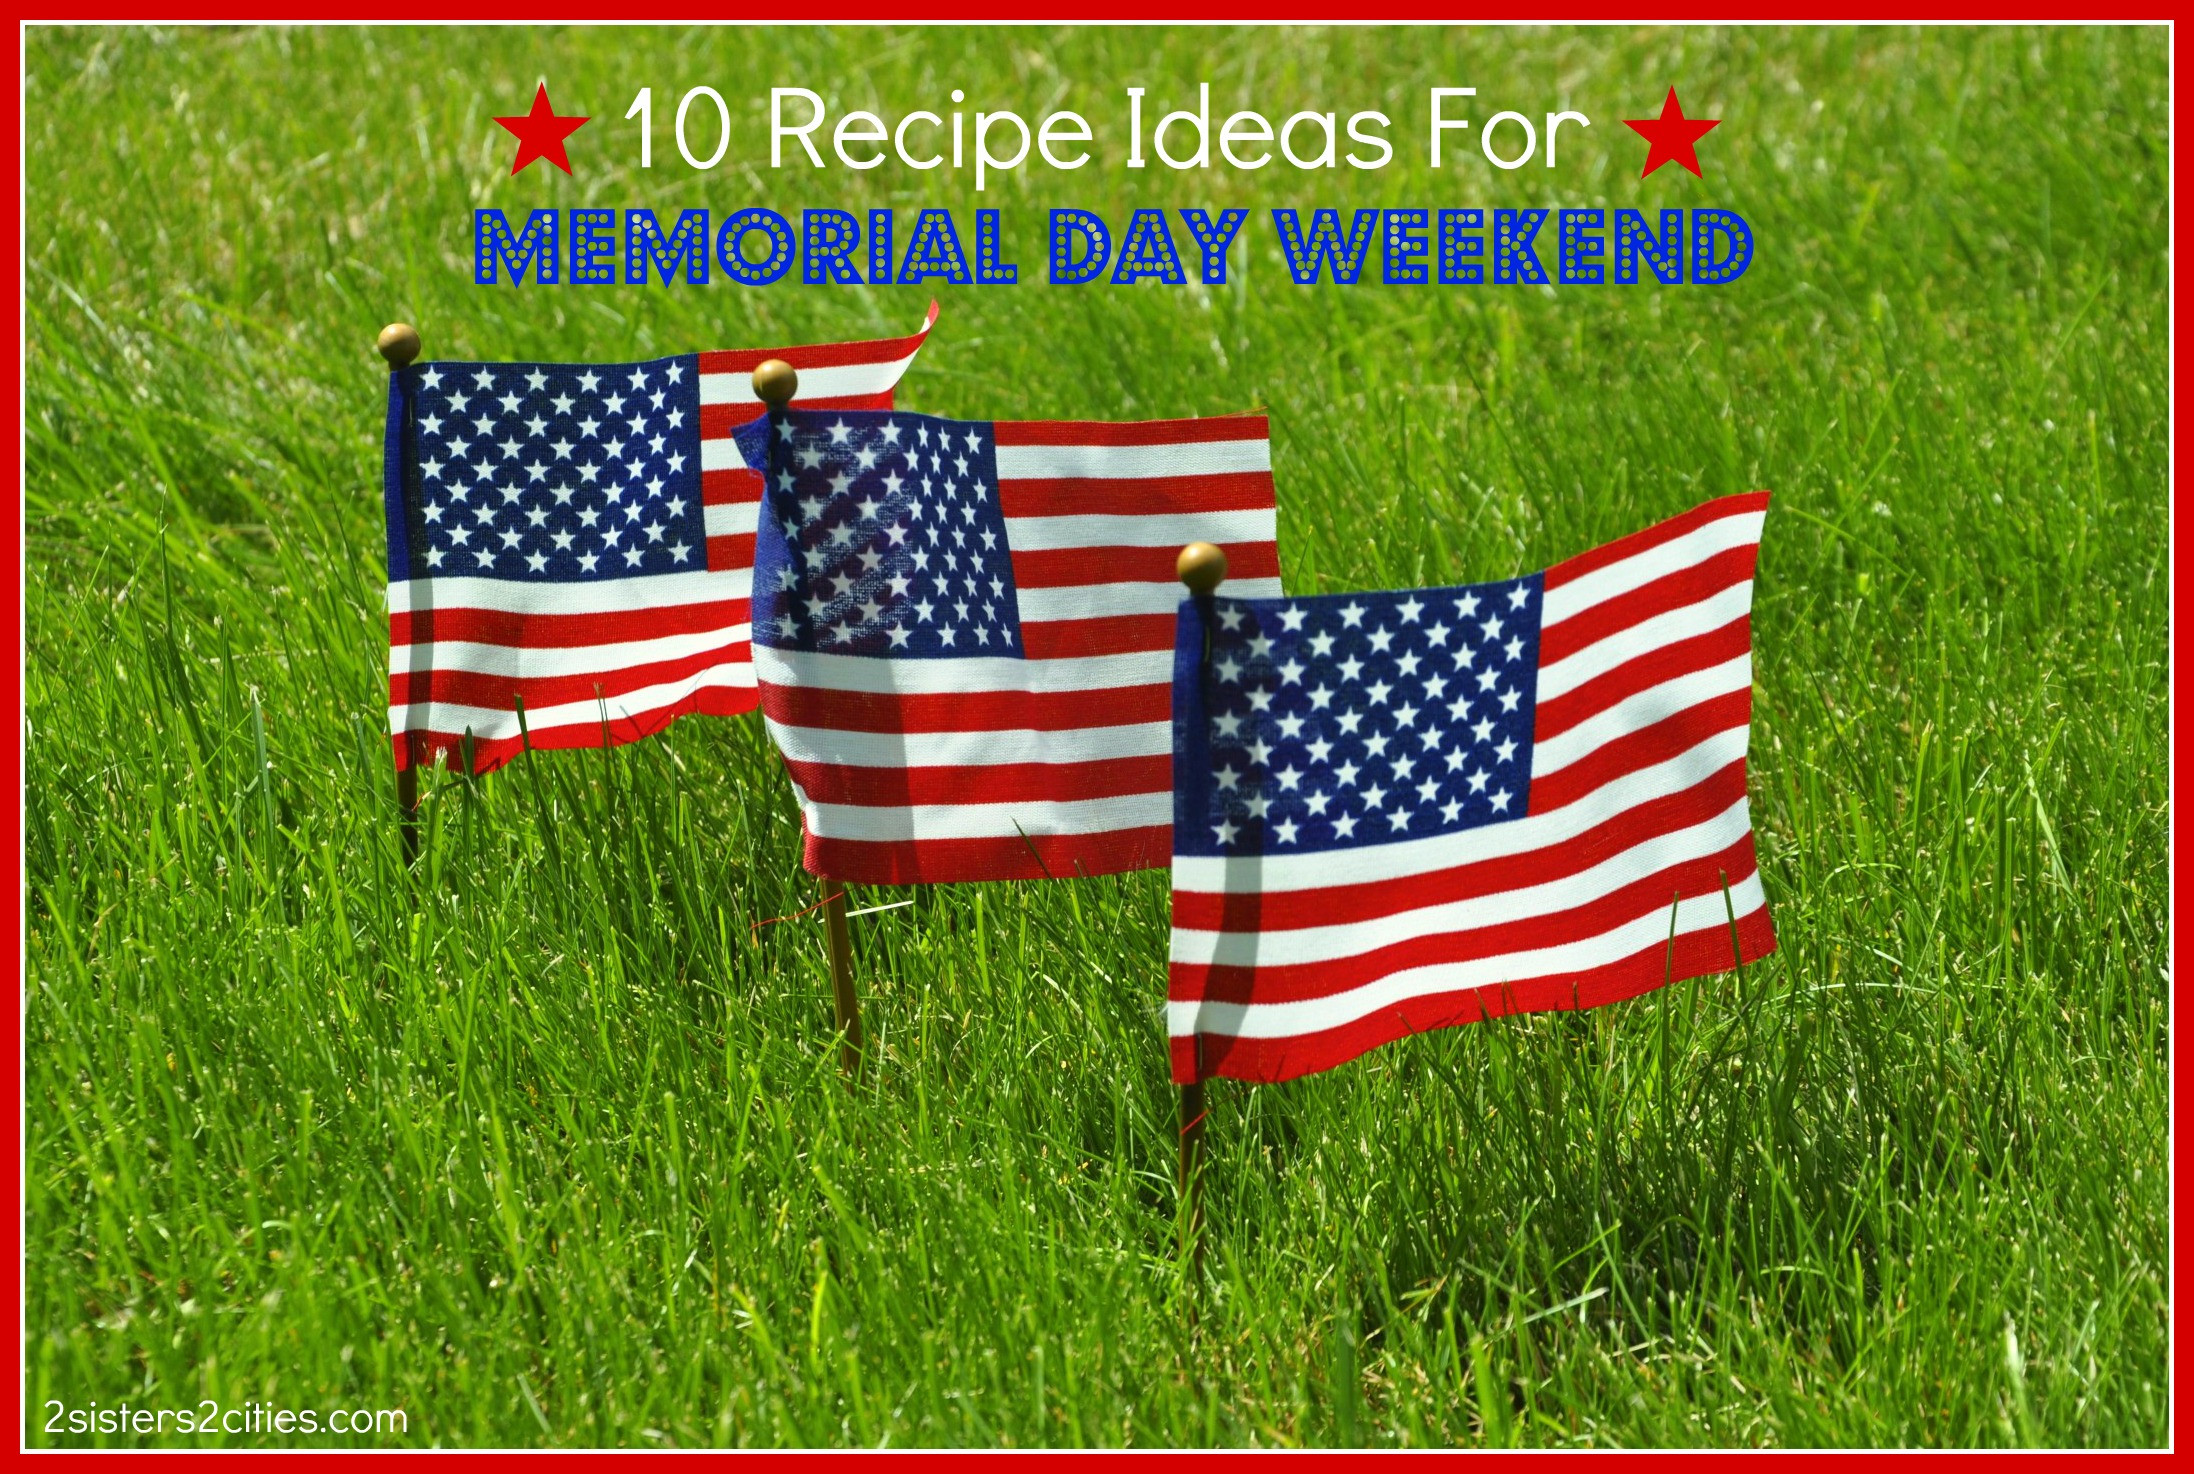 Memorial Day Weekend Ideas
 May 2012 Archives 2 Sisters 2 Cities